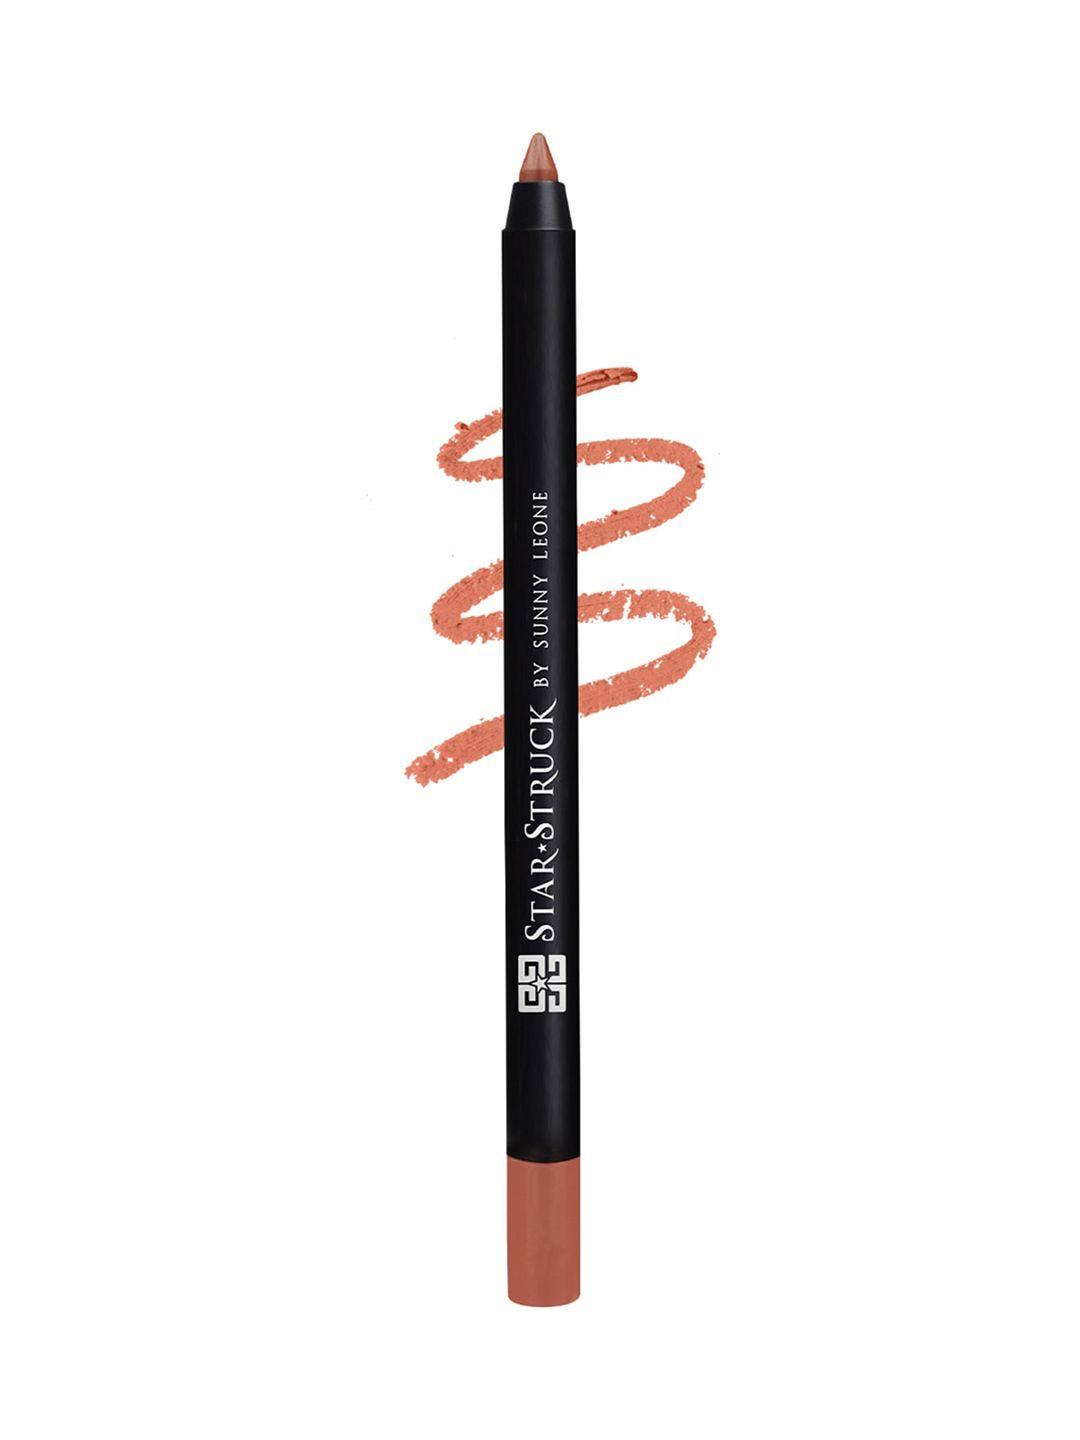 star struck by sunny leone make your lips pop water resistant lip liner - caramello